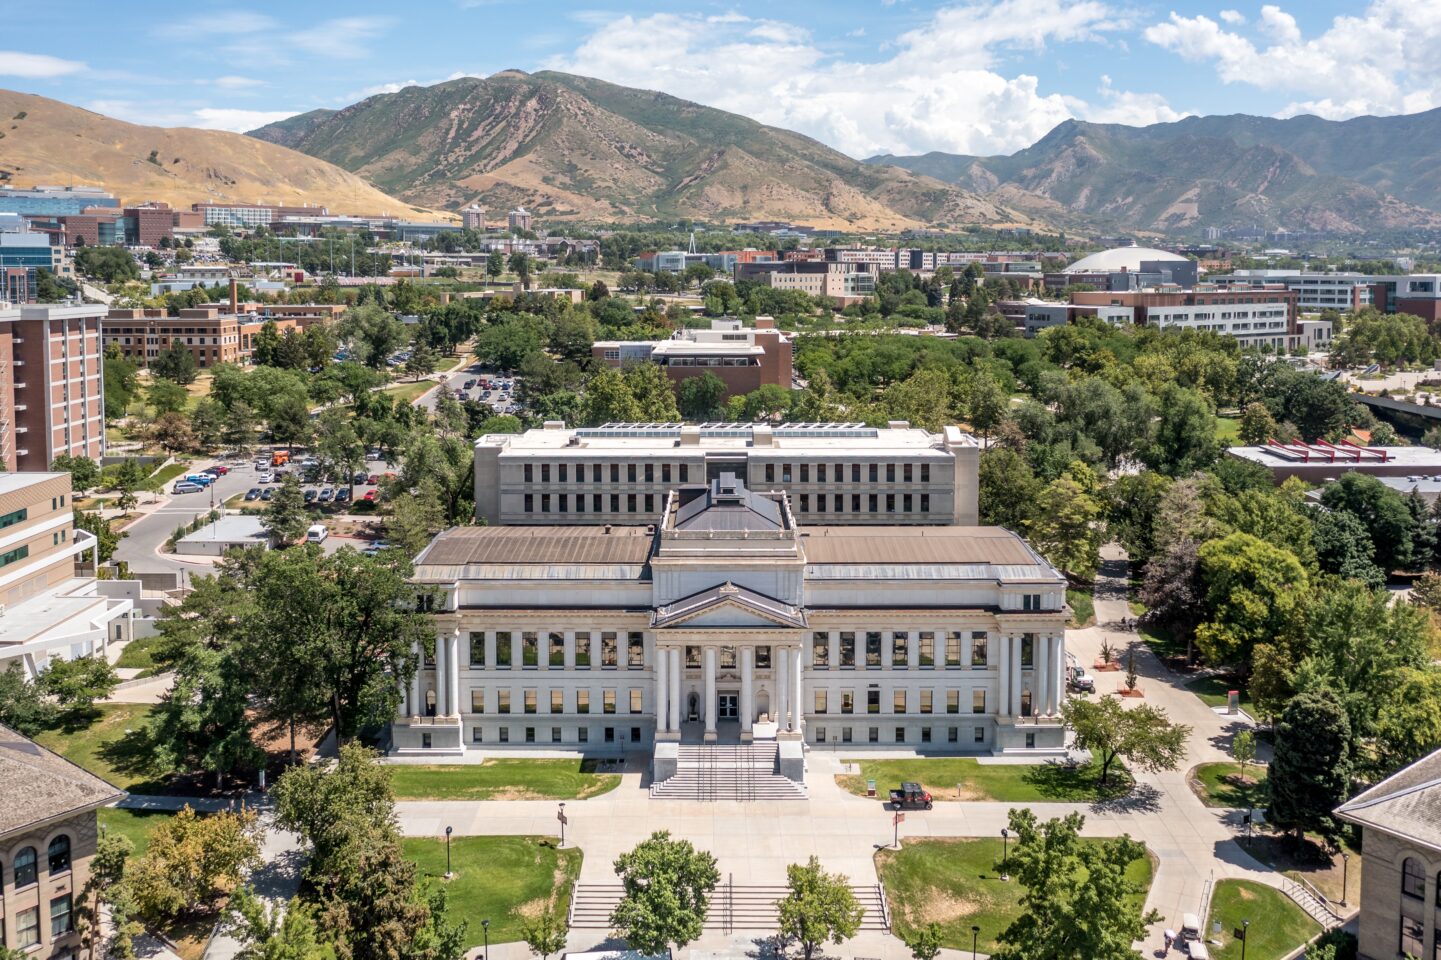 University of Utah to Open Medical Cannabis Center, Seeks DEA Approval